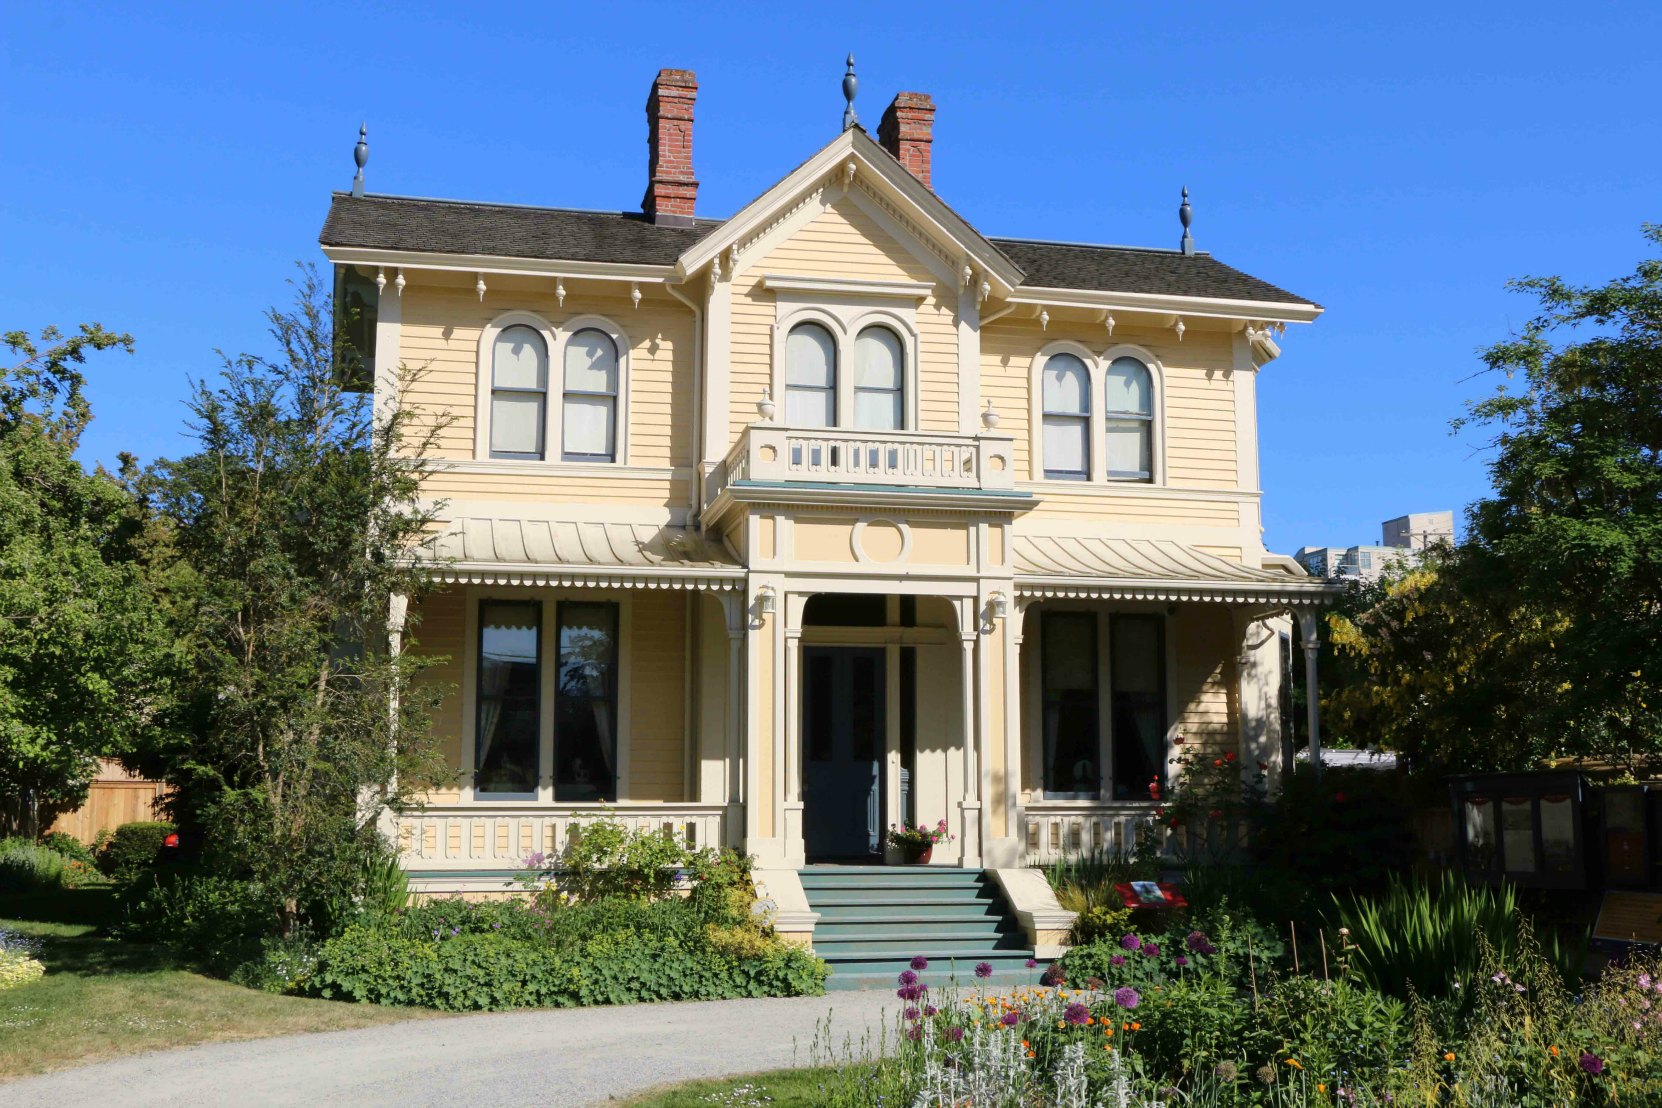 207 Government Street was built in 1863 and was once the childhood home of artist Emily Carr. It is now the Emily Carr National Historic Site of Canada. (photo by Victoria Online Sightseeing)